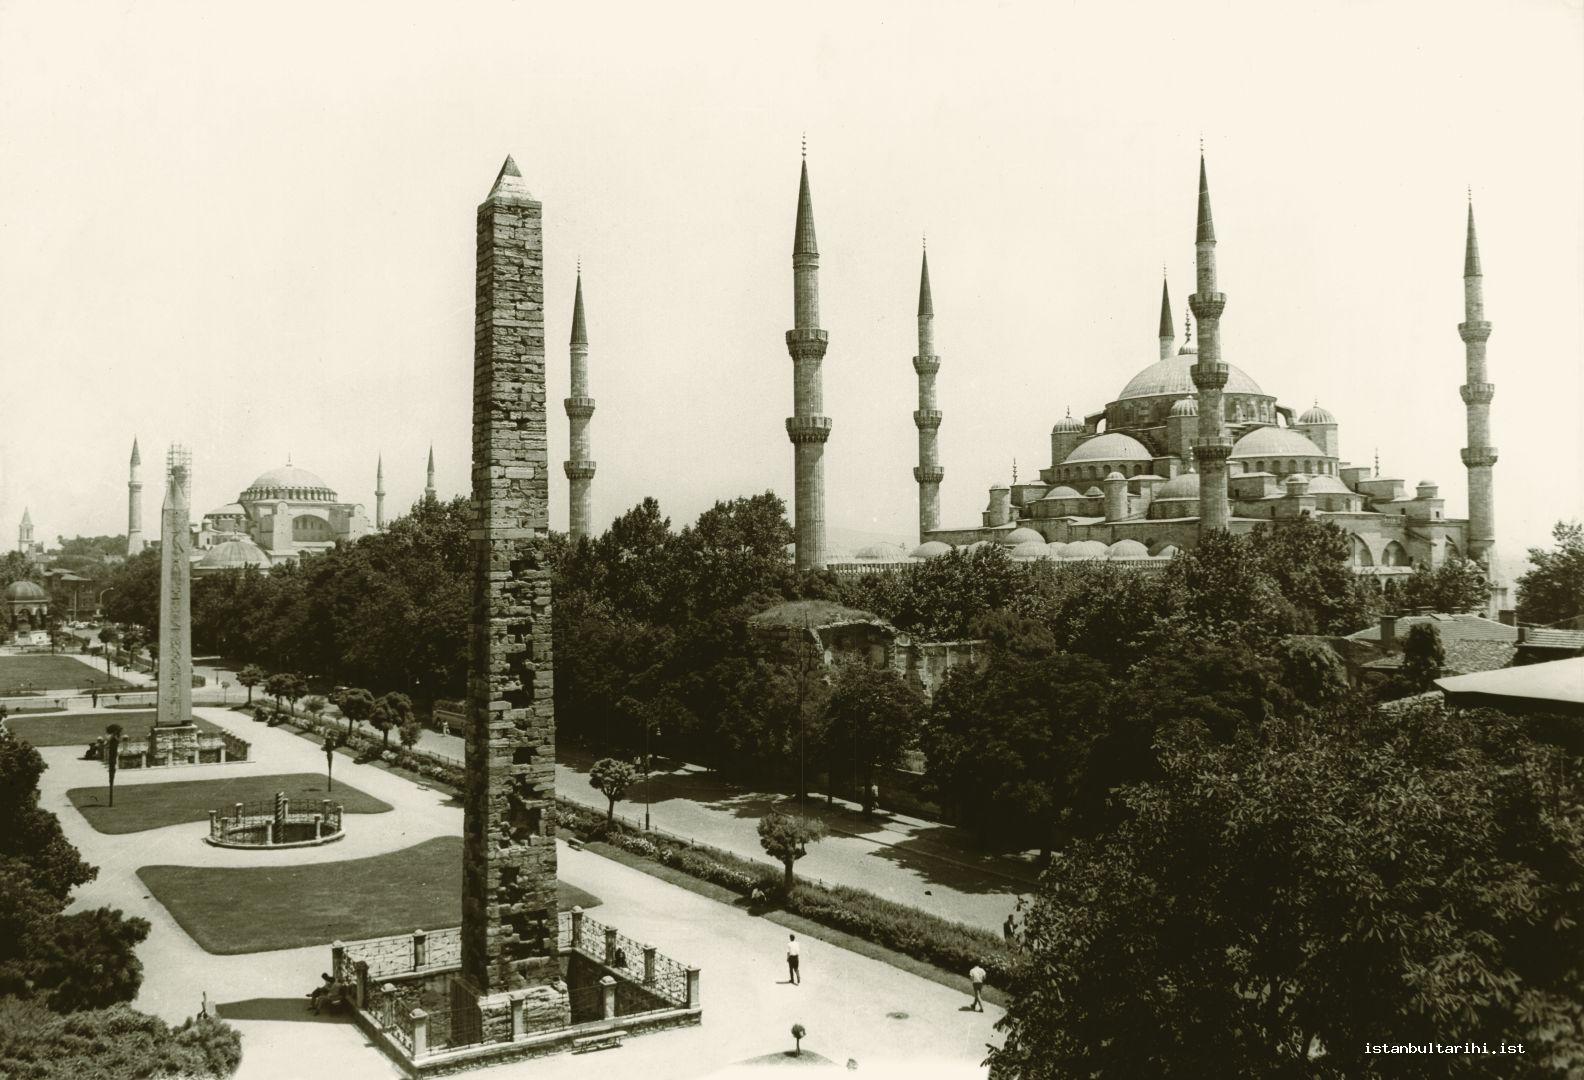 13- Sultanahmet Square in the early years of the Republic. Walled Obelisk, Serpent Column, and Obelisk of Theodosius. Sultanahmet (Blue) Mosque is on the right side and Ayasofya is in the back.